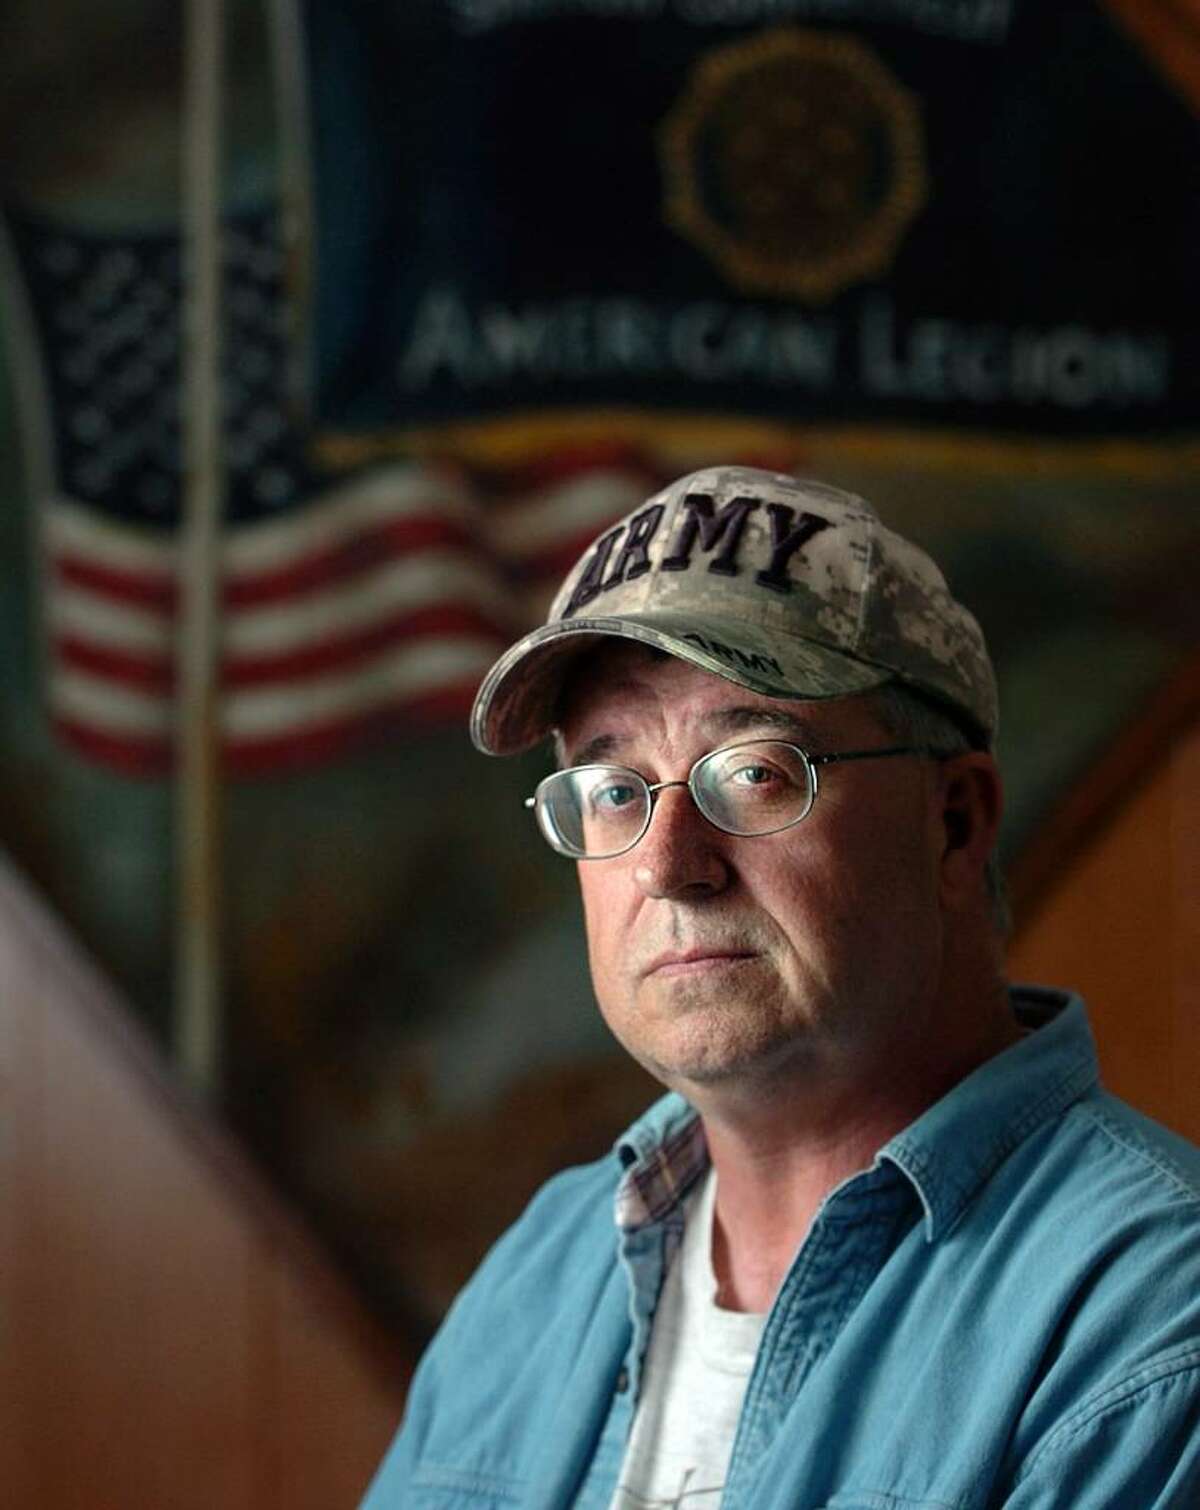 Vietnam veteran David Gallagher, of Shelton, is photographed at American Legion Post 16 in Shelton Tuesday May 18, 2010. He supports Connecticut Attorney General Richard Blumenthal despite recent allegations he lied about his military service.